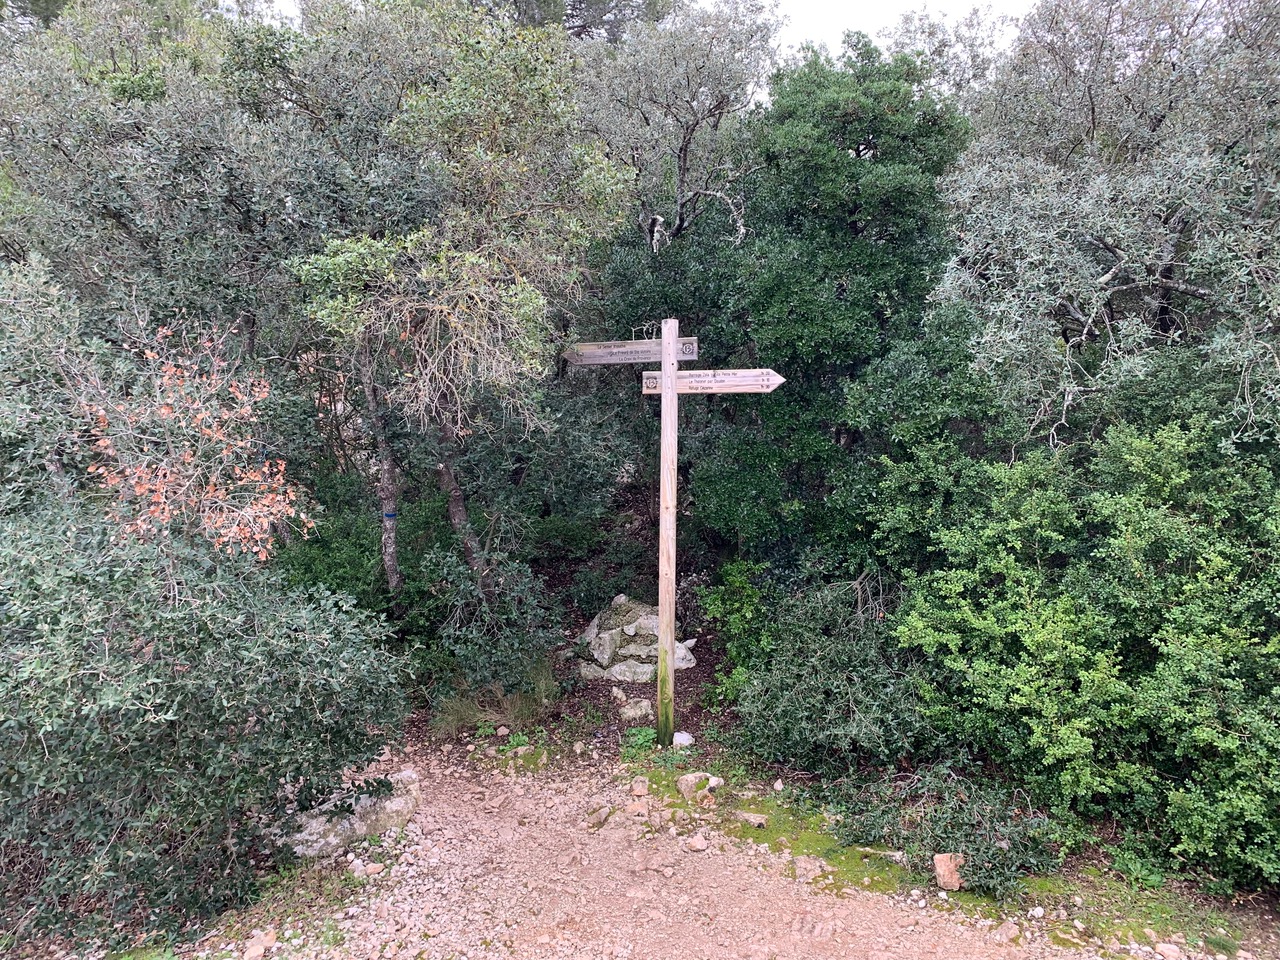 Fork in the trail with a sign pointing toward Montagne Sainte-Victoire